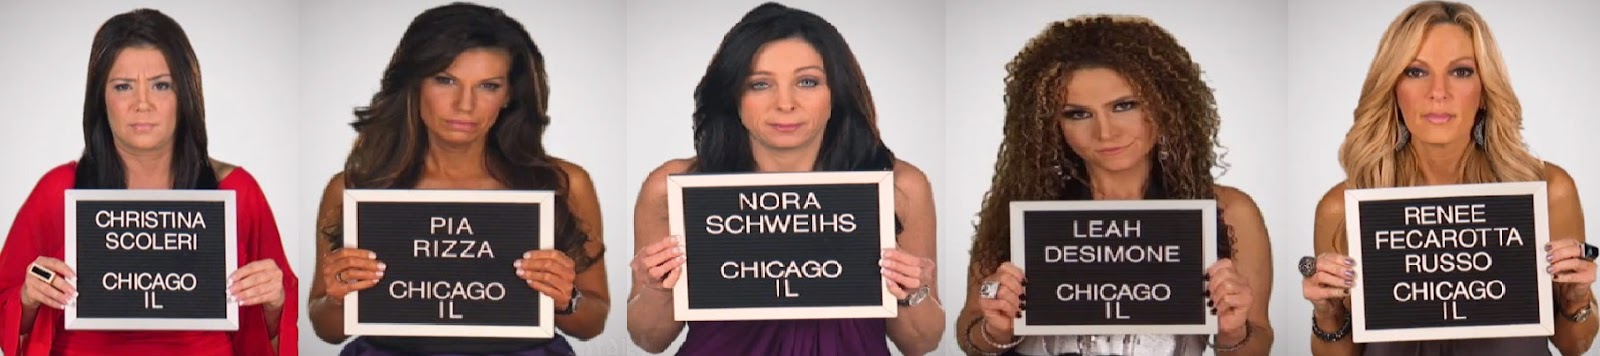 mob wives uncensored